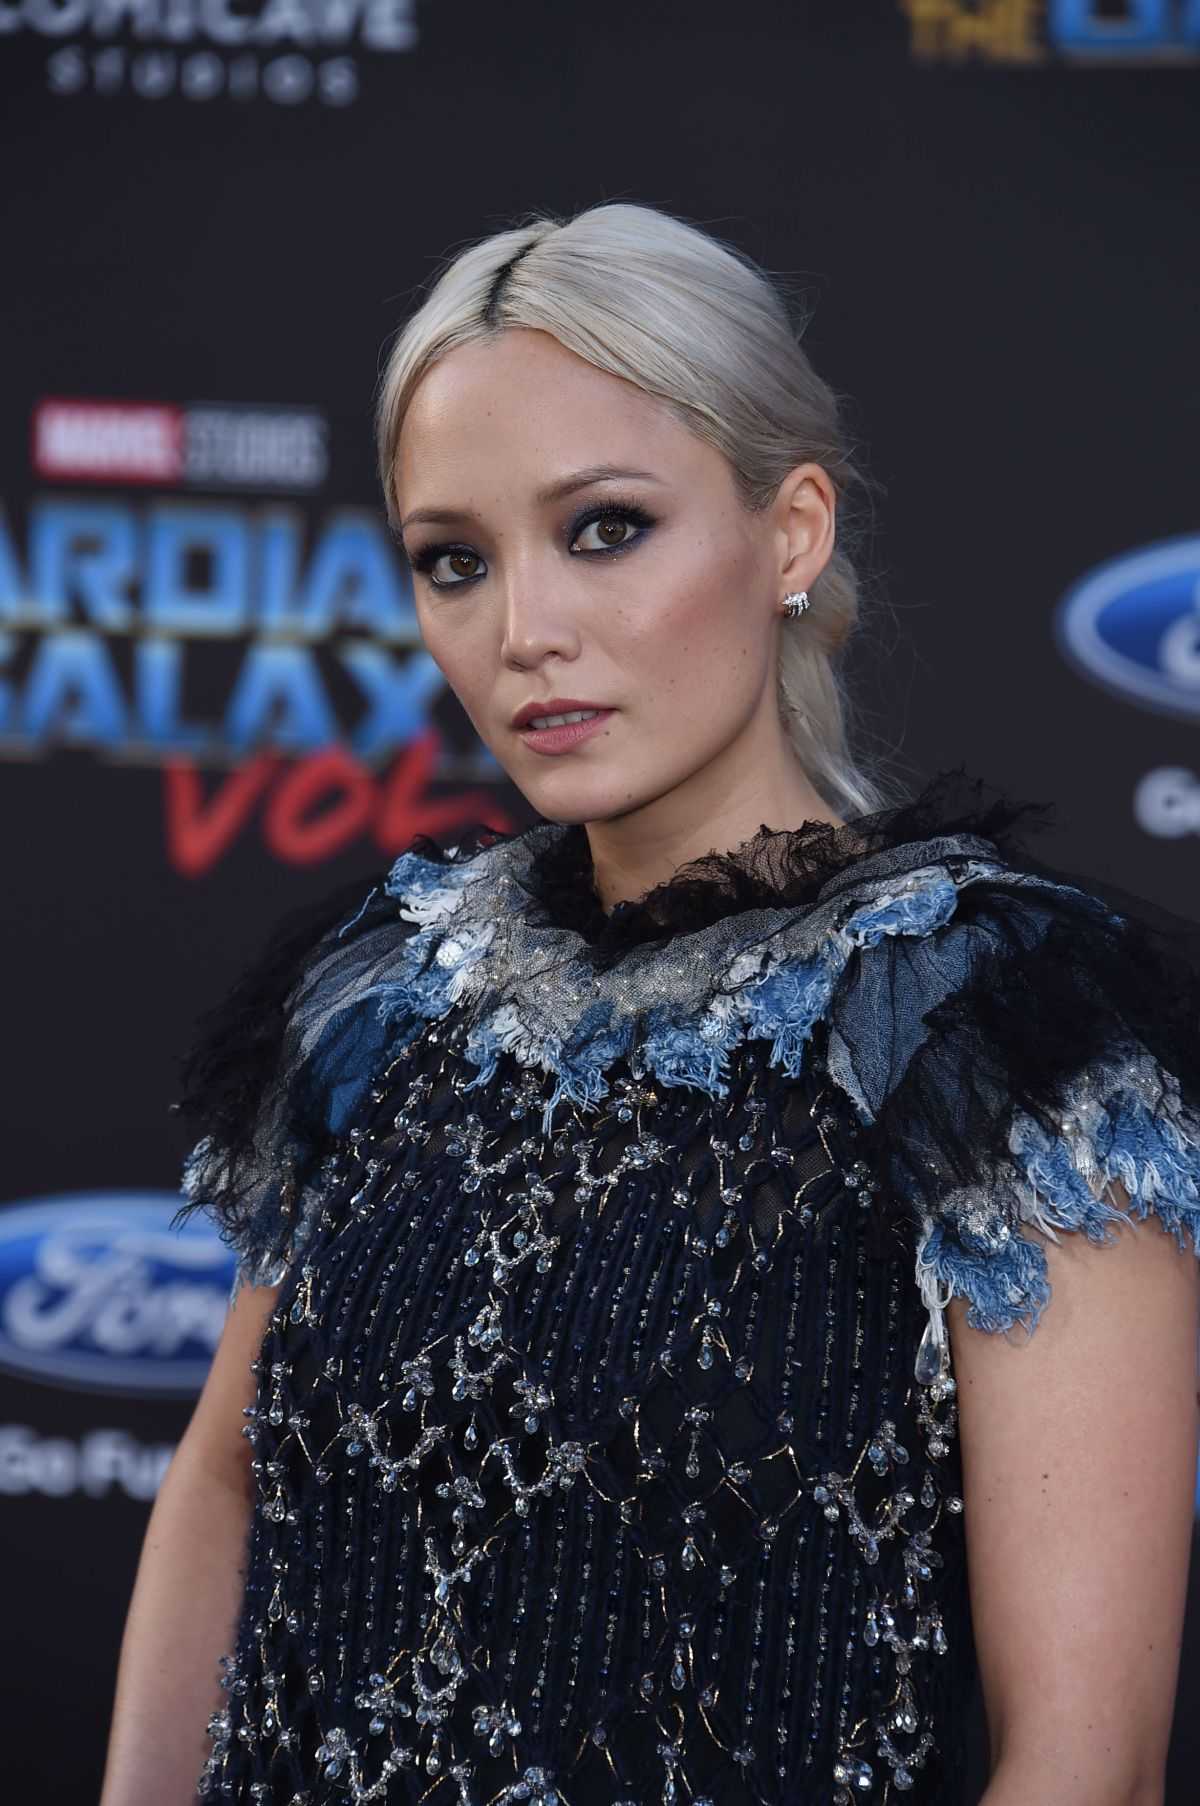 70+ Hot Pictures Of Pom Klementieff Who Plays Mantis In Marvel Cinematic Universe 126